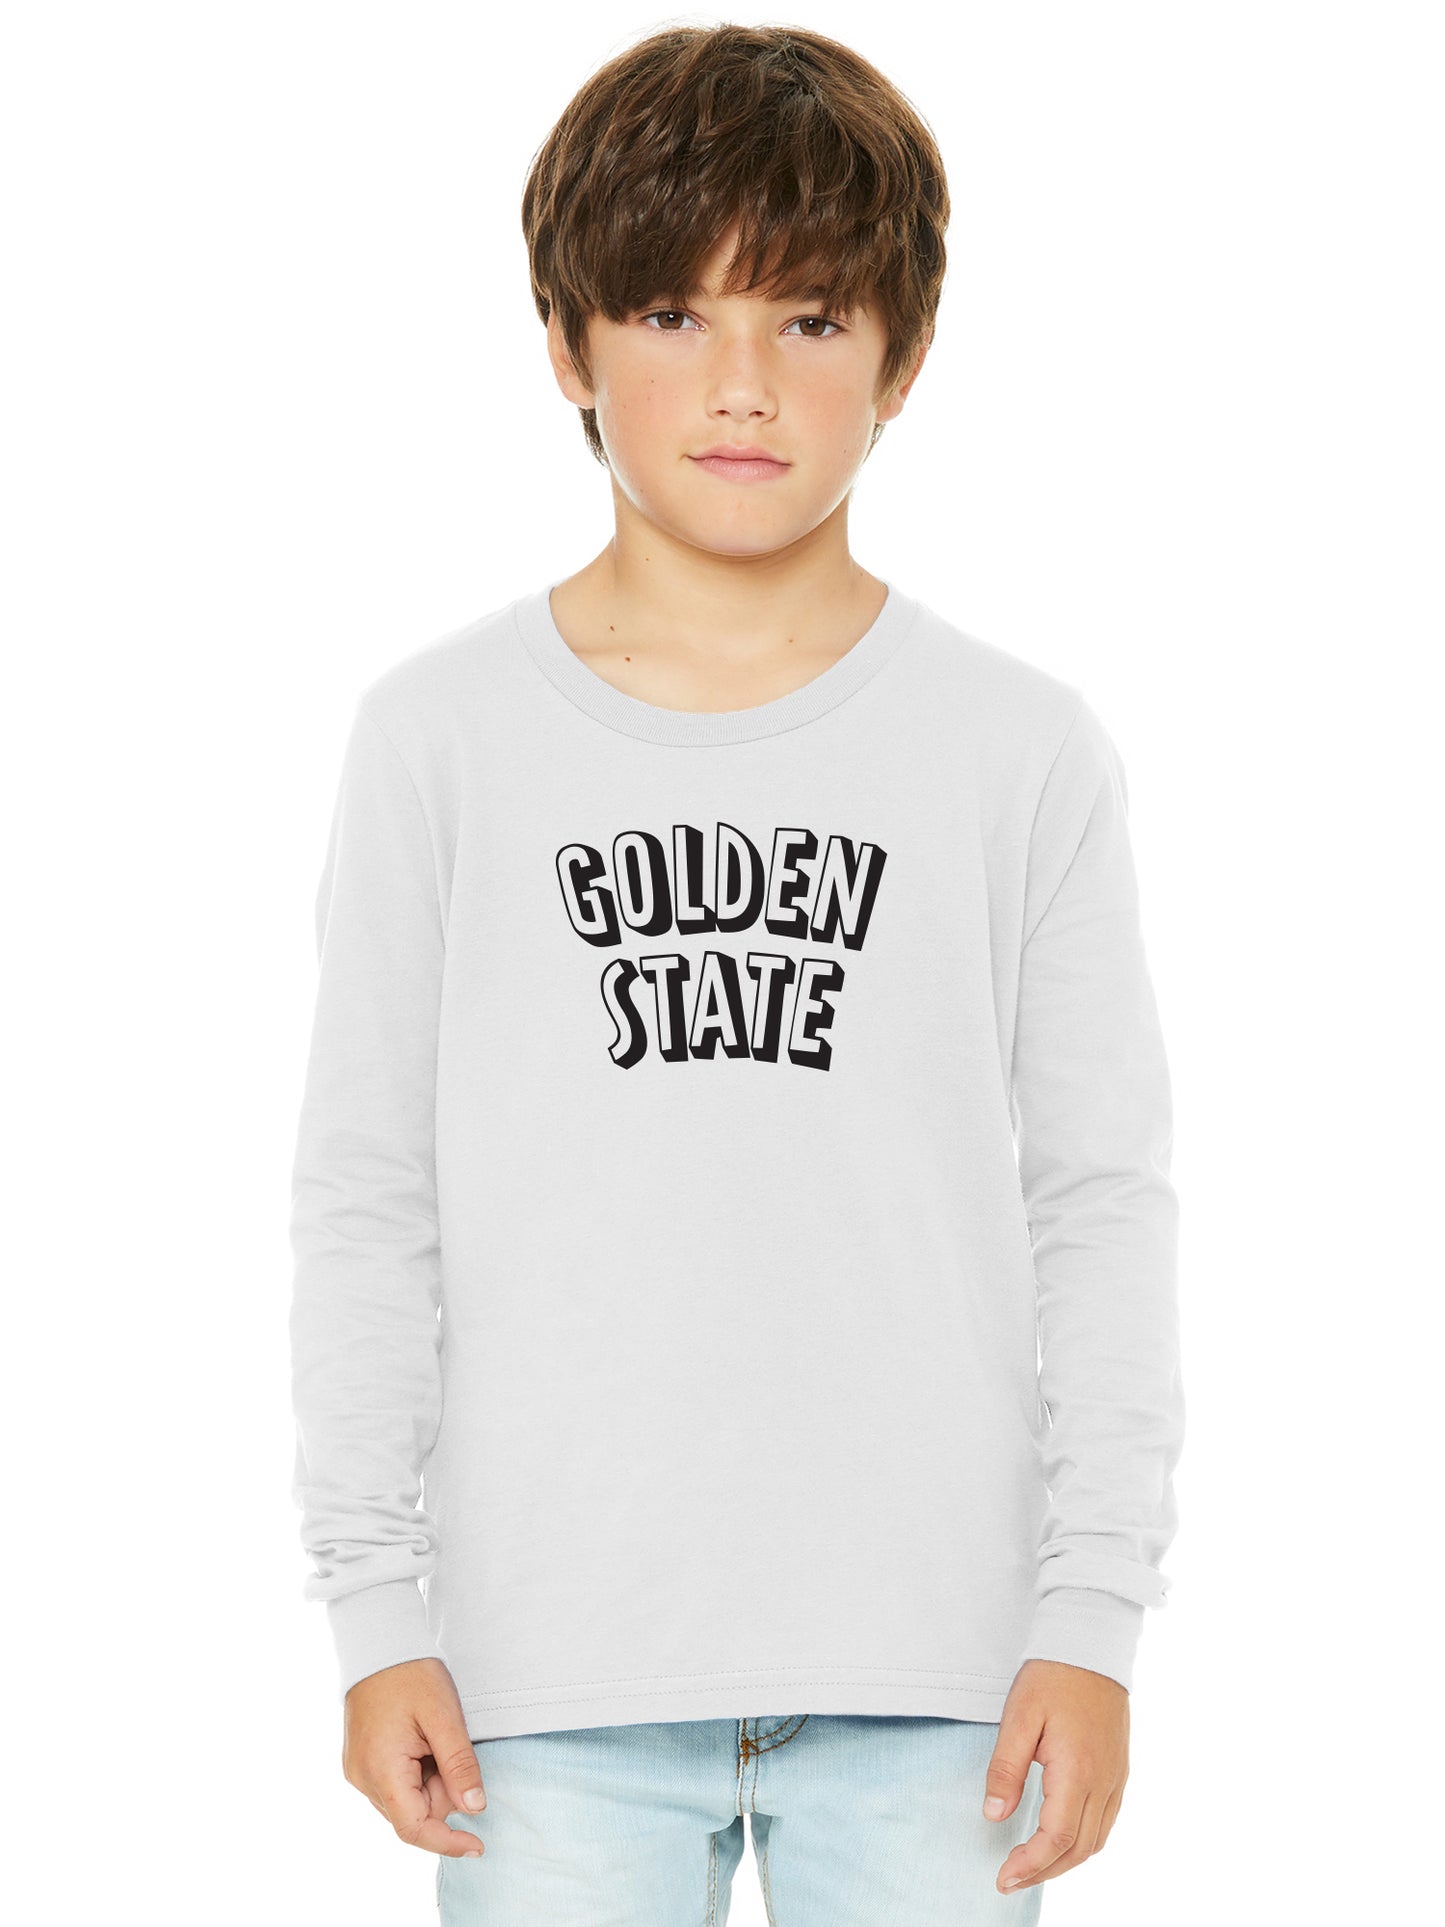 Daxton Youth Long Sleeve Golden State Basic Tshirt